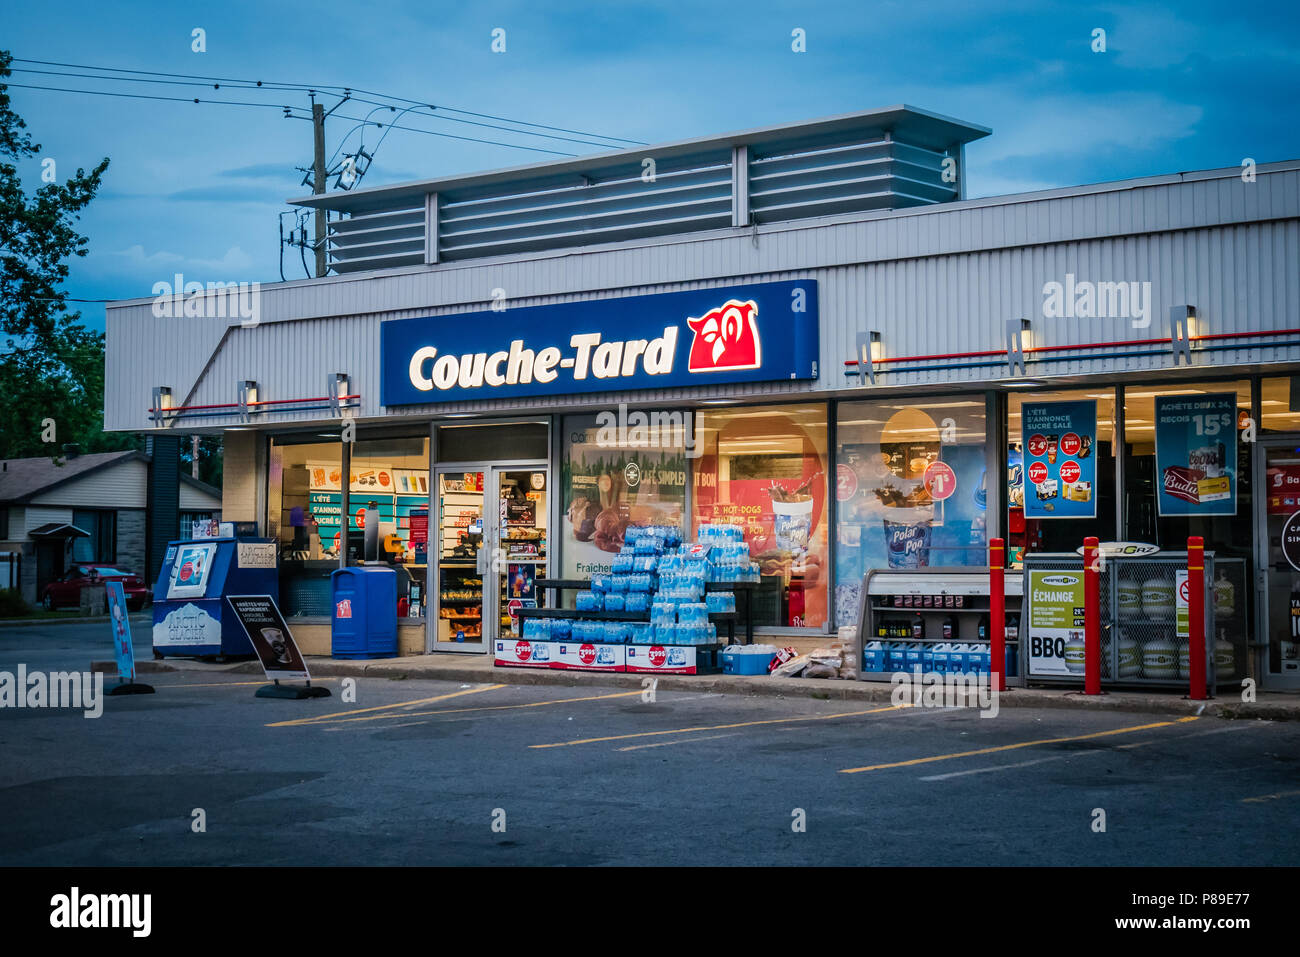 Couche tard Convenience Store in Quebec Stockfoto